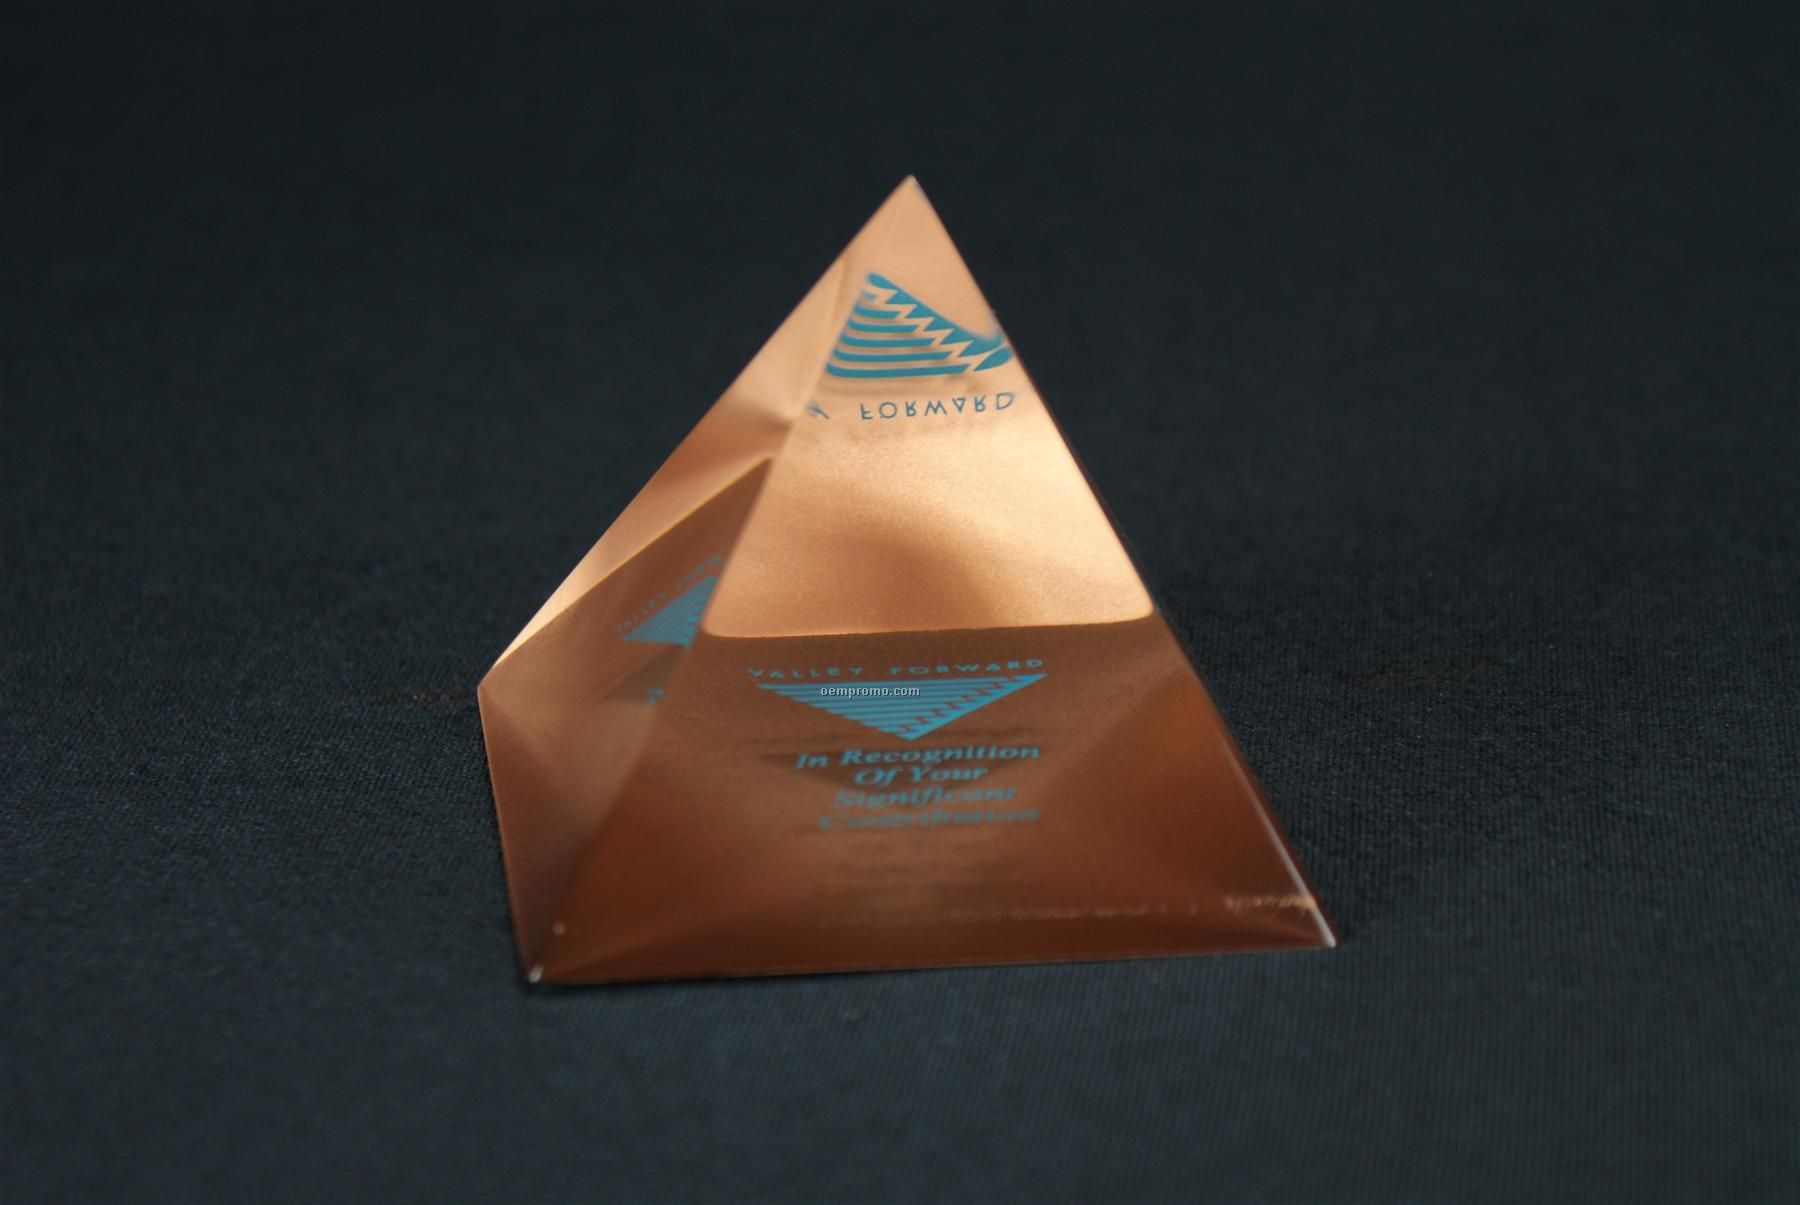 Lucite Pyramid - For Embedment Only (3"X3" )